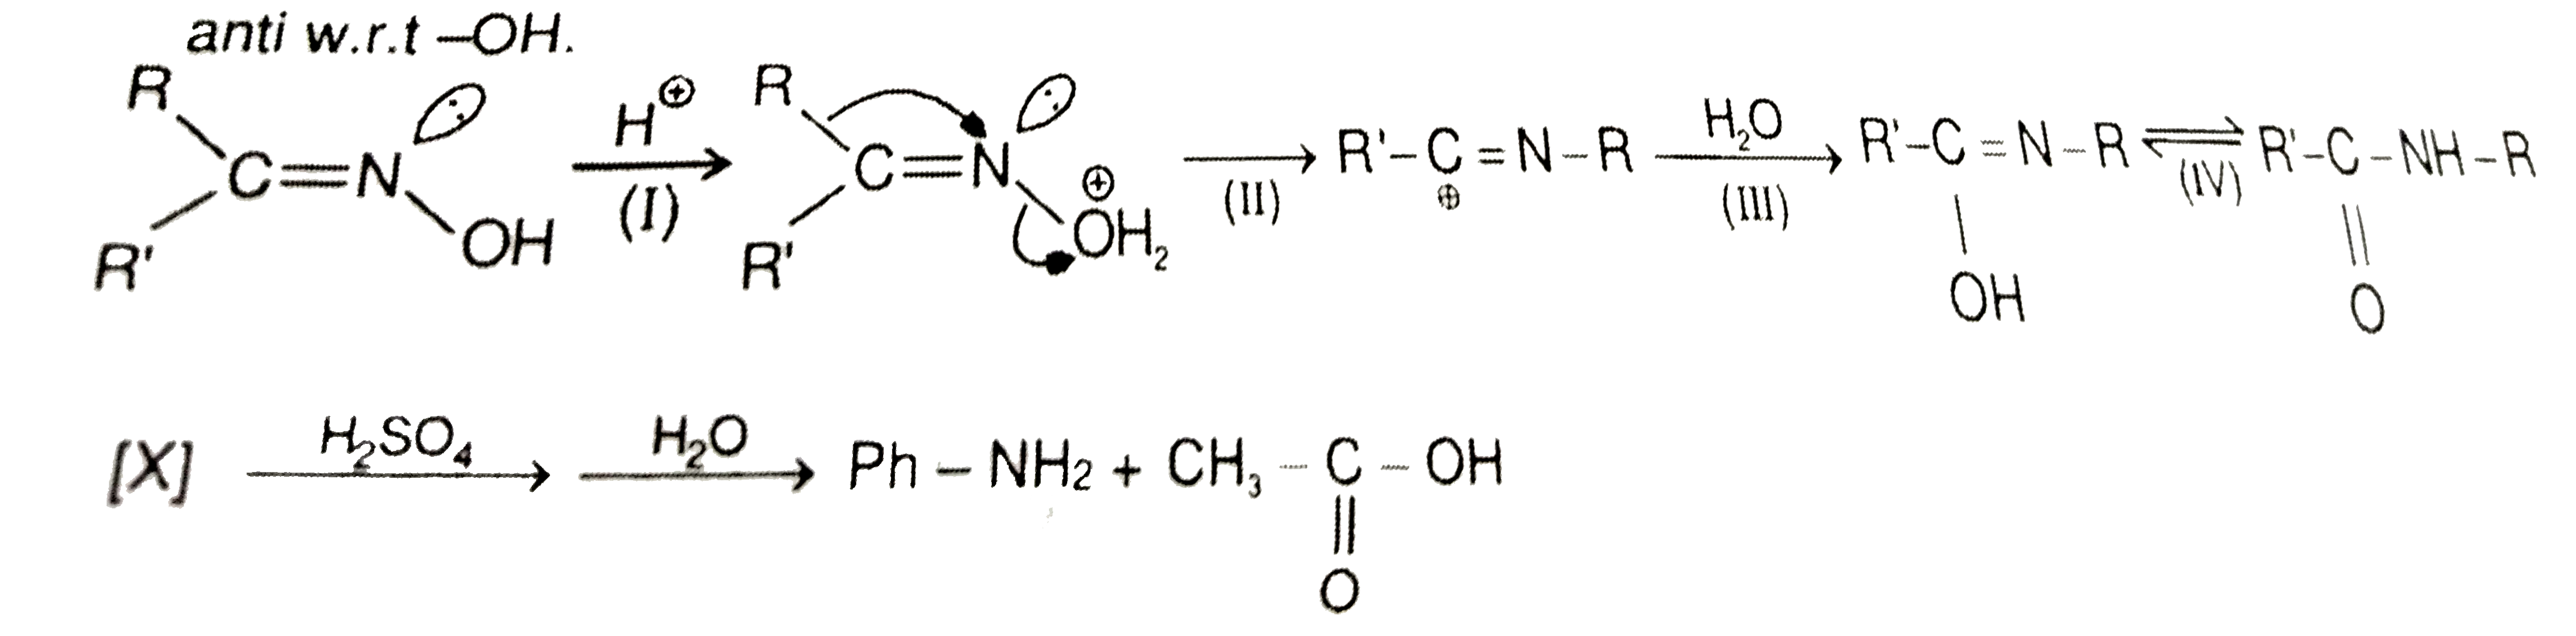 Alldehydes and Ketones react with NH(2)OH to form aldoximes and Ketoximes respectively. Configuration of these can be determined by Beckmann rearragement as that group migrates which is anti w.r.t -OH         The product (B) is :